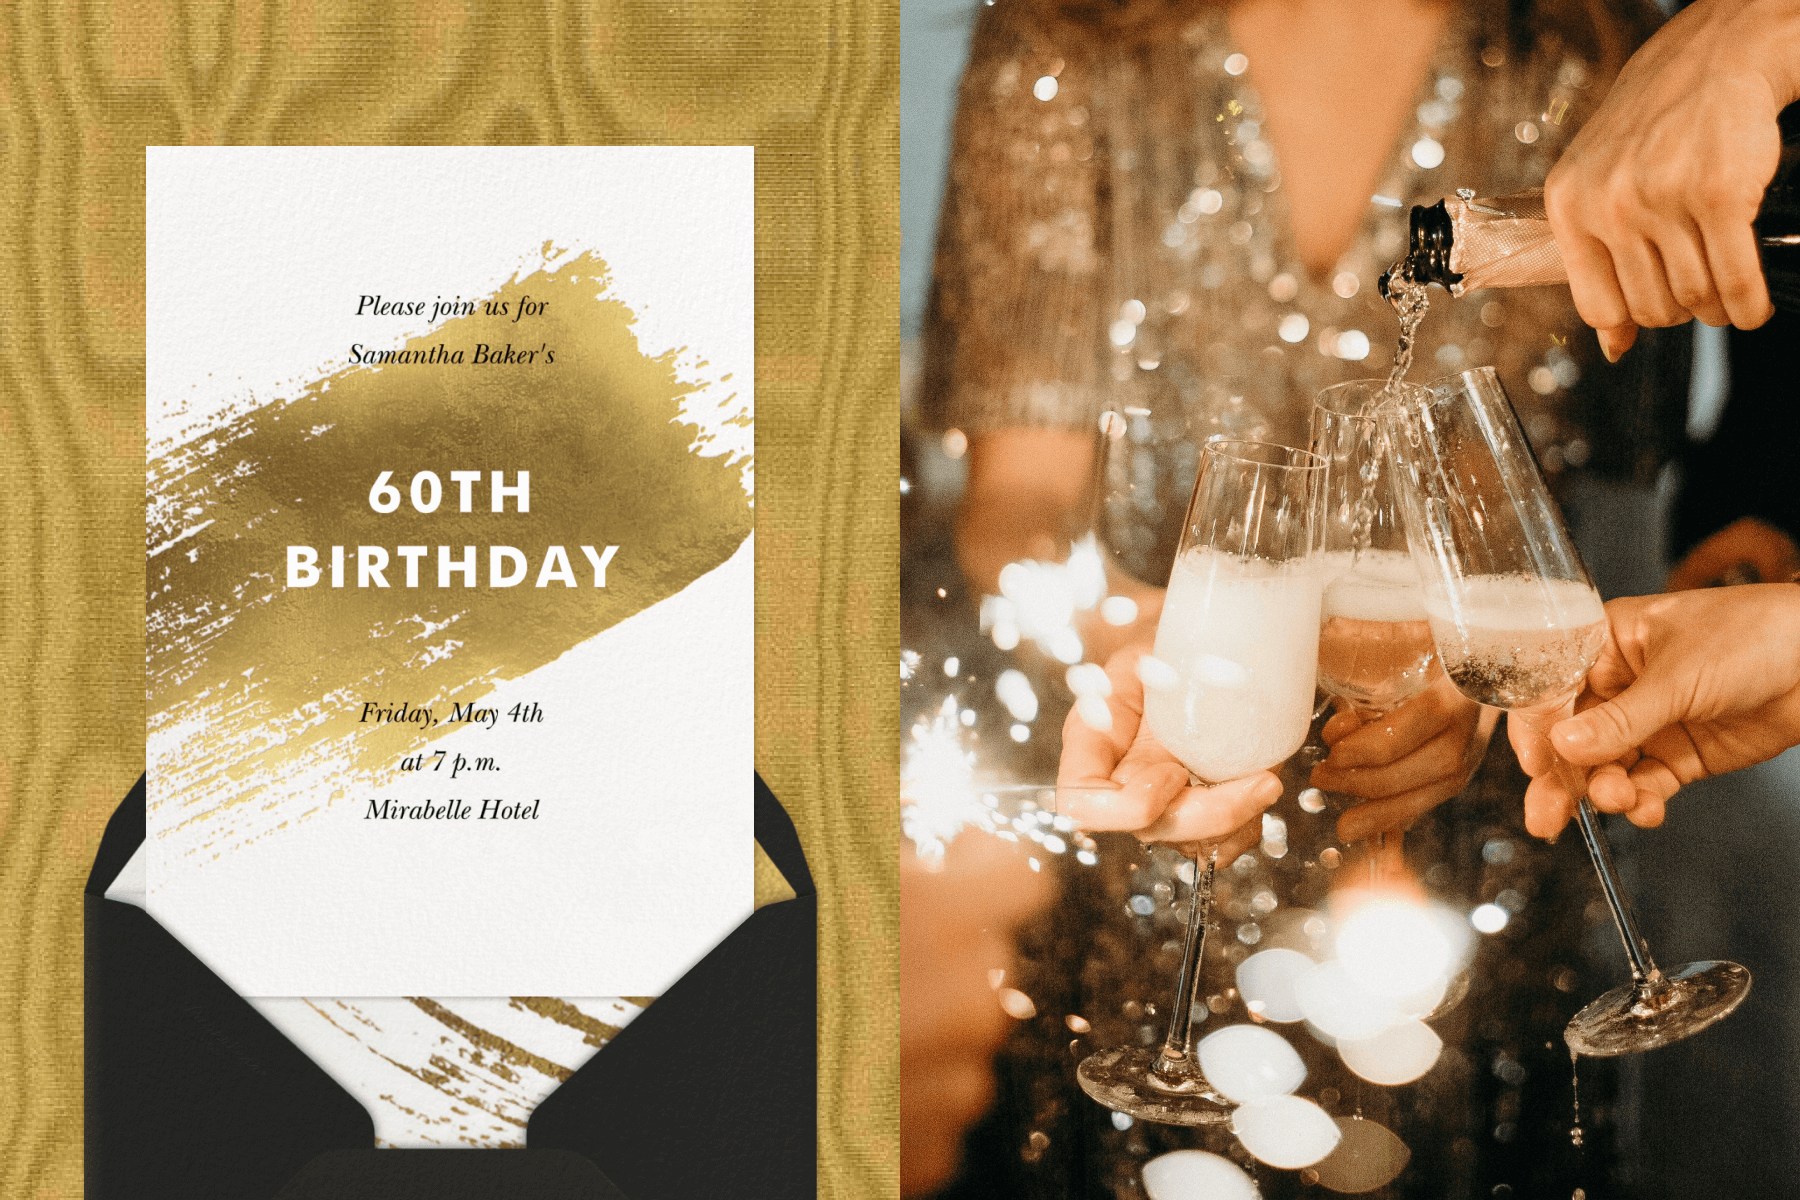  Left: “Impasto - Gold” invitation by Paperless Post featuring a gold paint swipe; Right: Close-up image of friends pouring champagne into glasses.